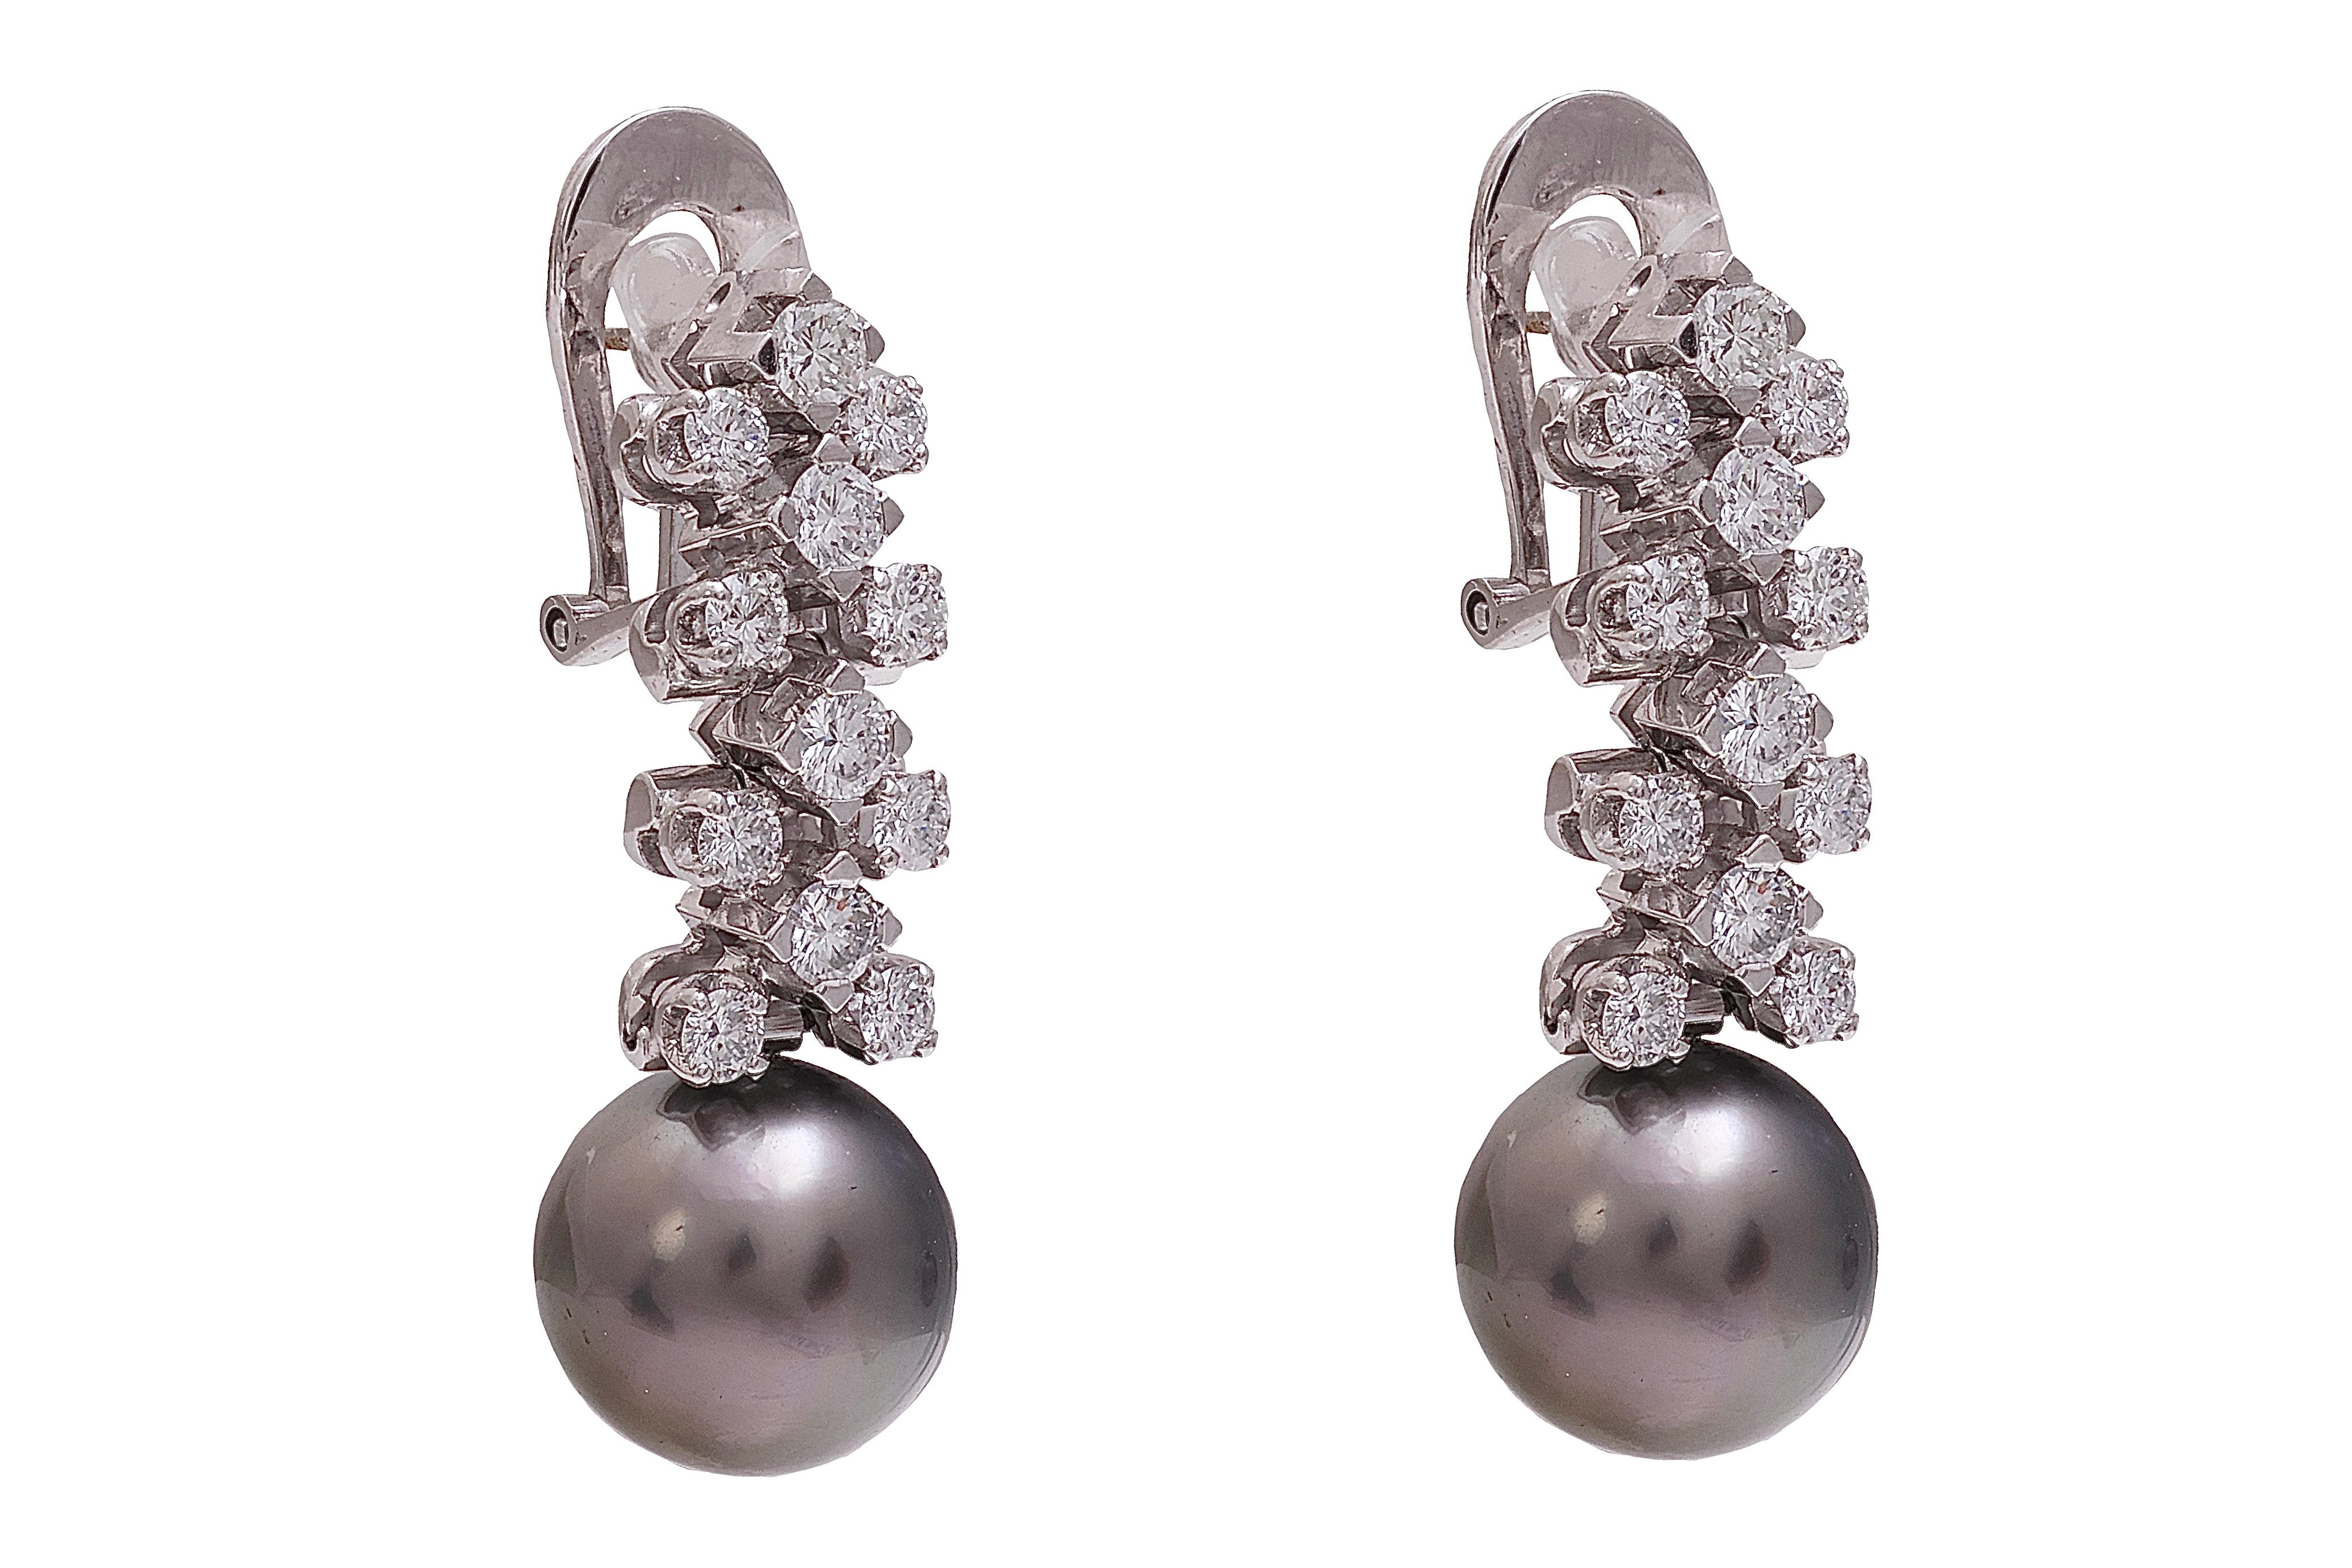 Very Elegant, Beautiful 18 kt. White Gold Earrings With Tahiti Pearls and 2.32 ct. Diamonds

Amazing earrings, moving when worn !

Pearls: Tahiti pearls, diameter 12.6 mm

Diamonds: brilliant cut diamonds, together 2.32 ct.

Material: 18 kt. white